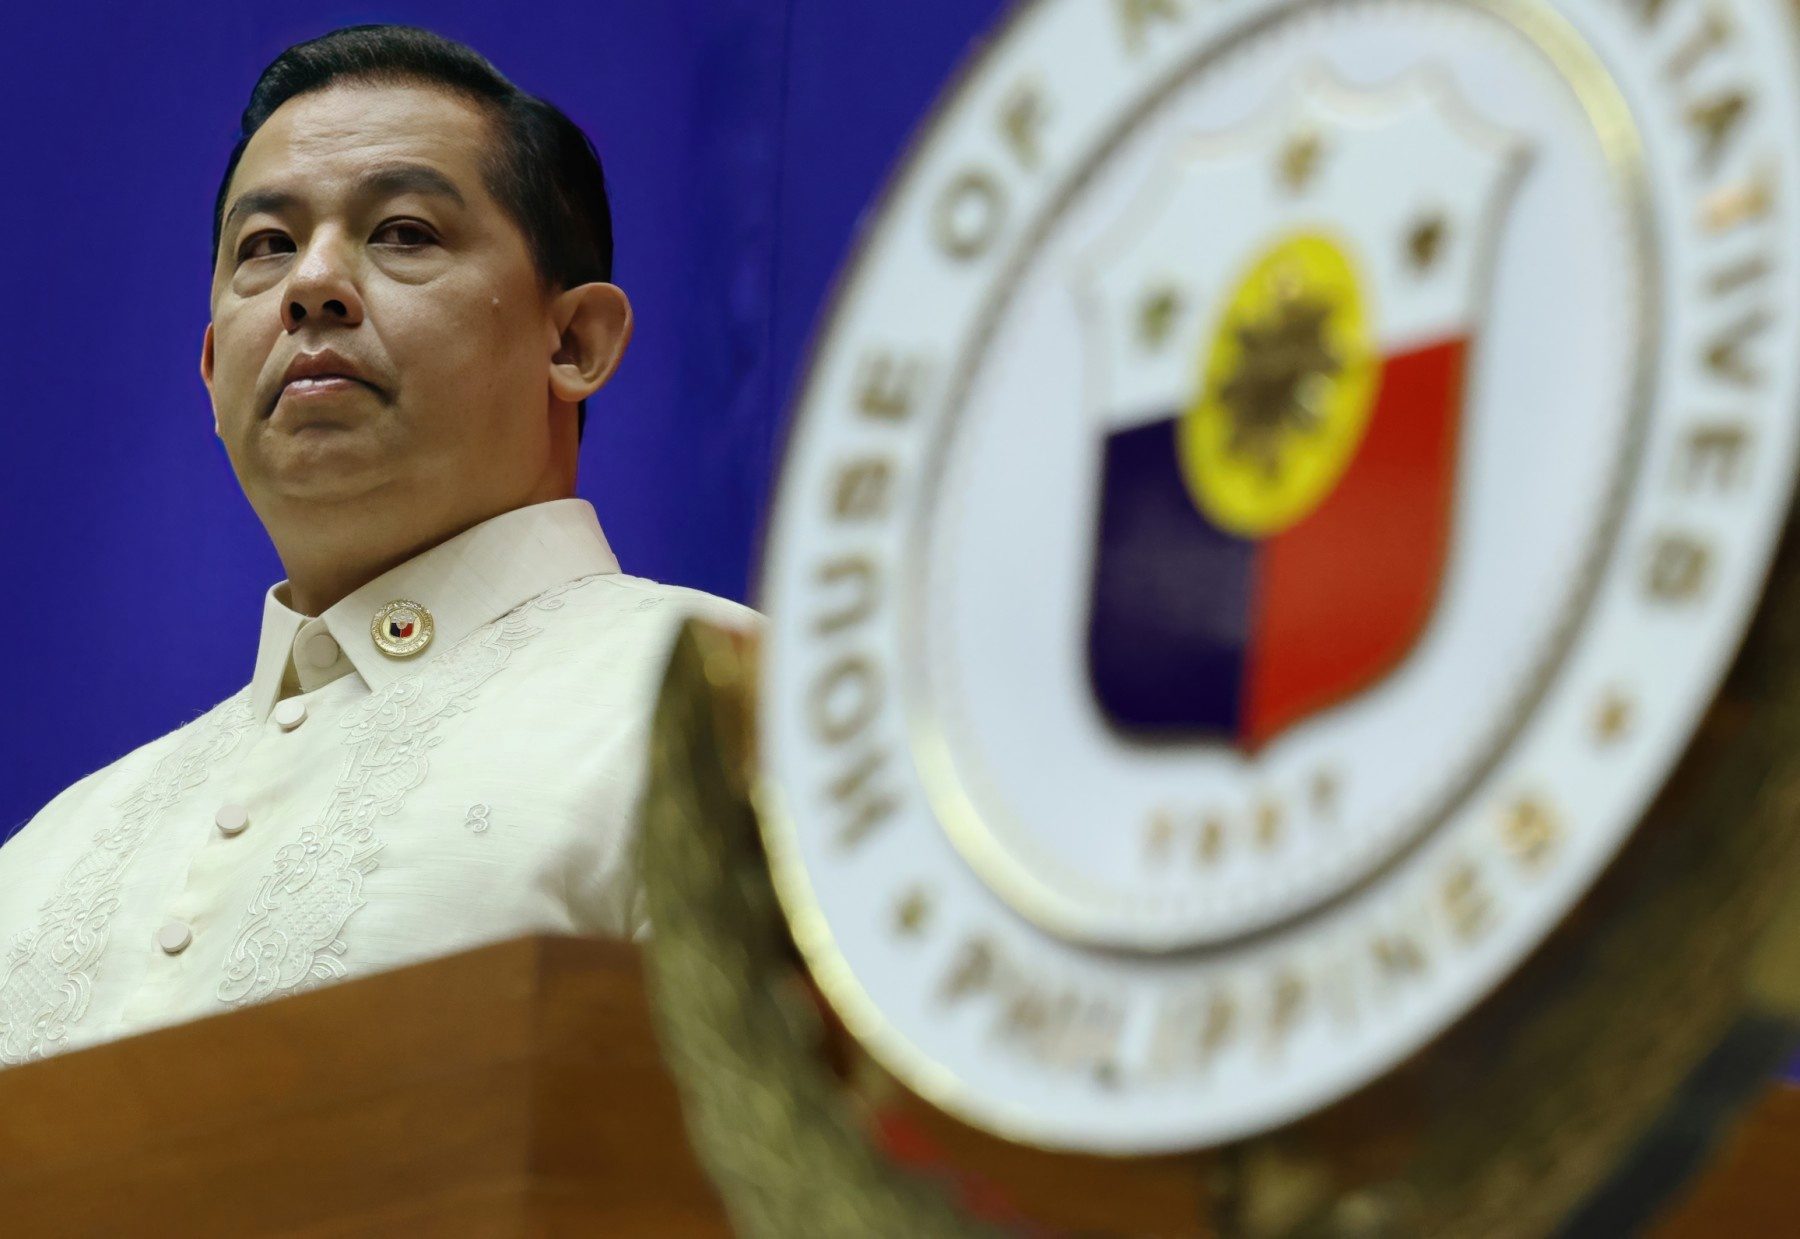 Group wants Romualdez to guarantee reported Harvard donation not gov’t funds